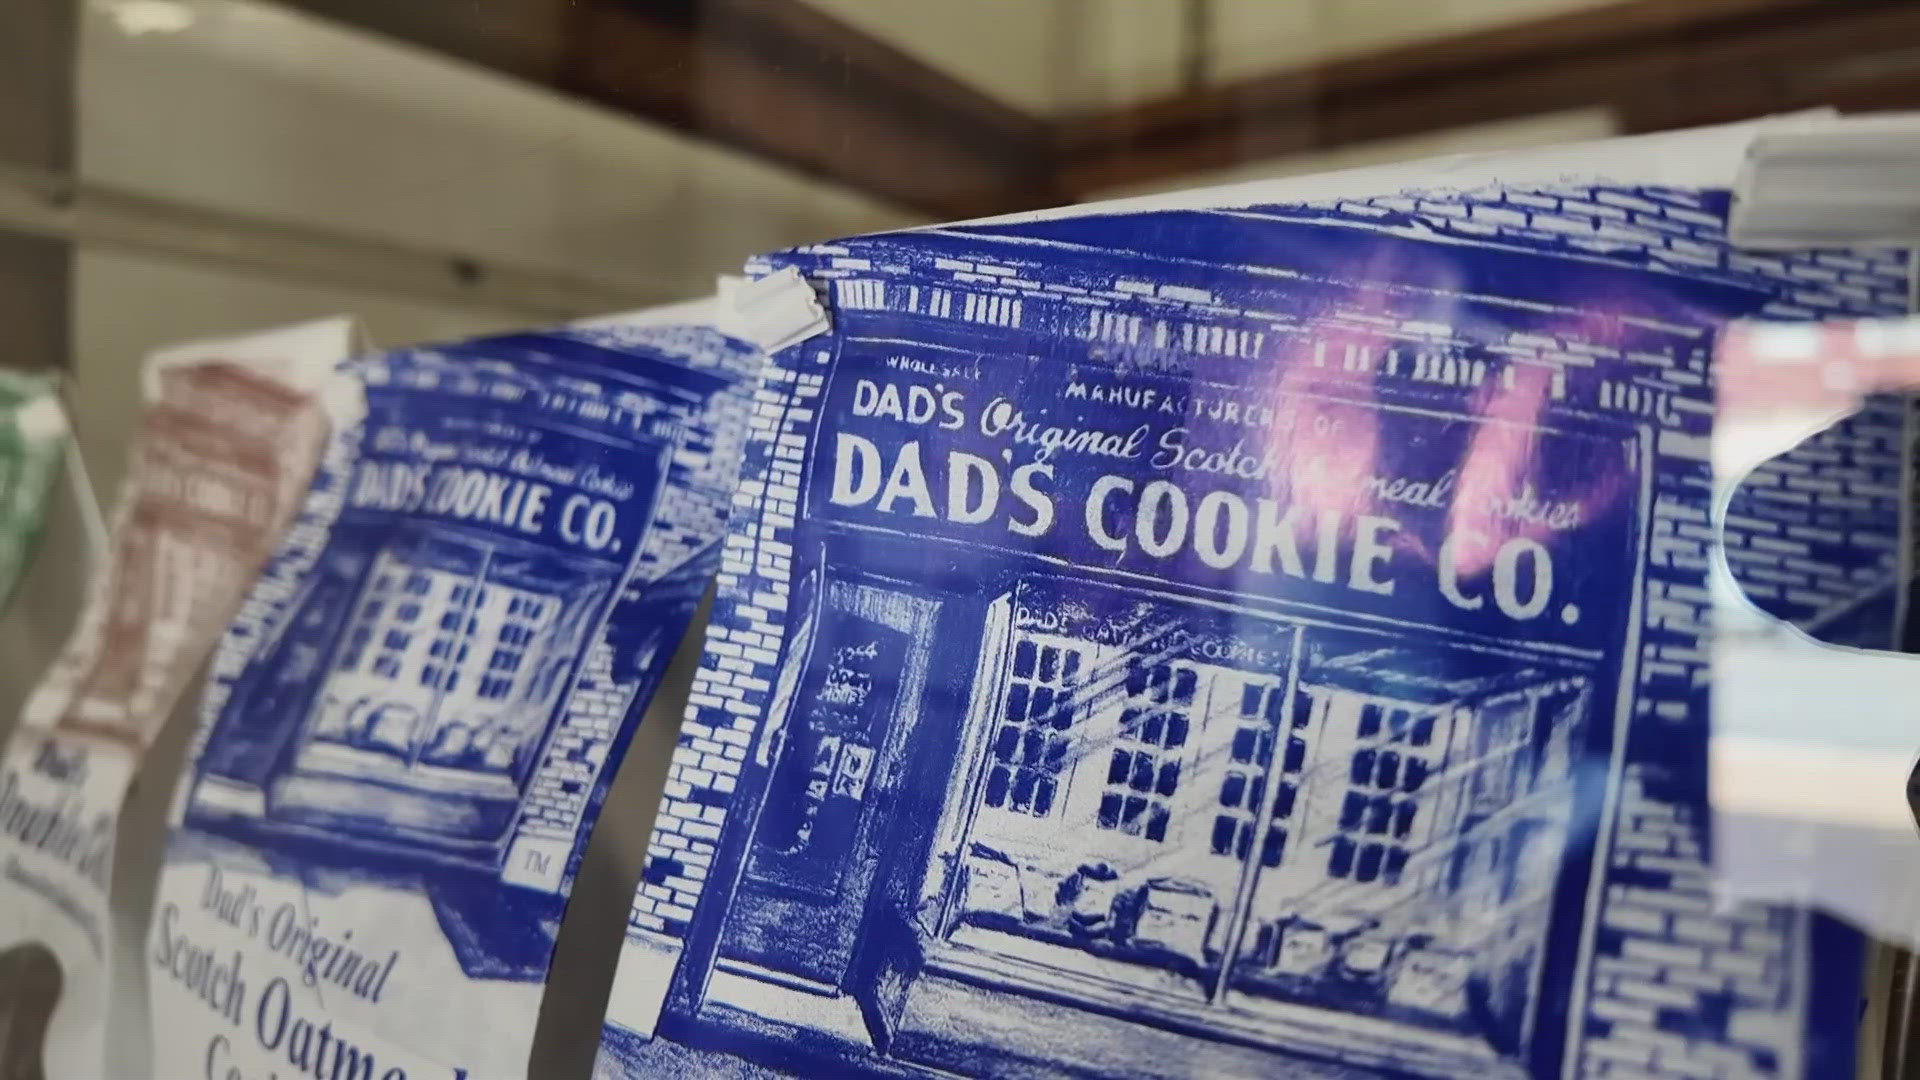 For the second time since 1927, Dad's Cookie Company is changing hands. The south St. Louis bakery is best known for its Scotch oatmeal cookies.